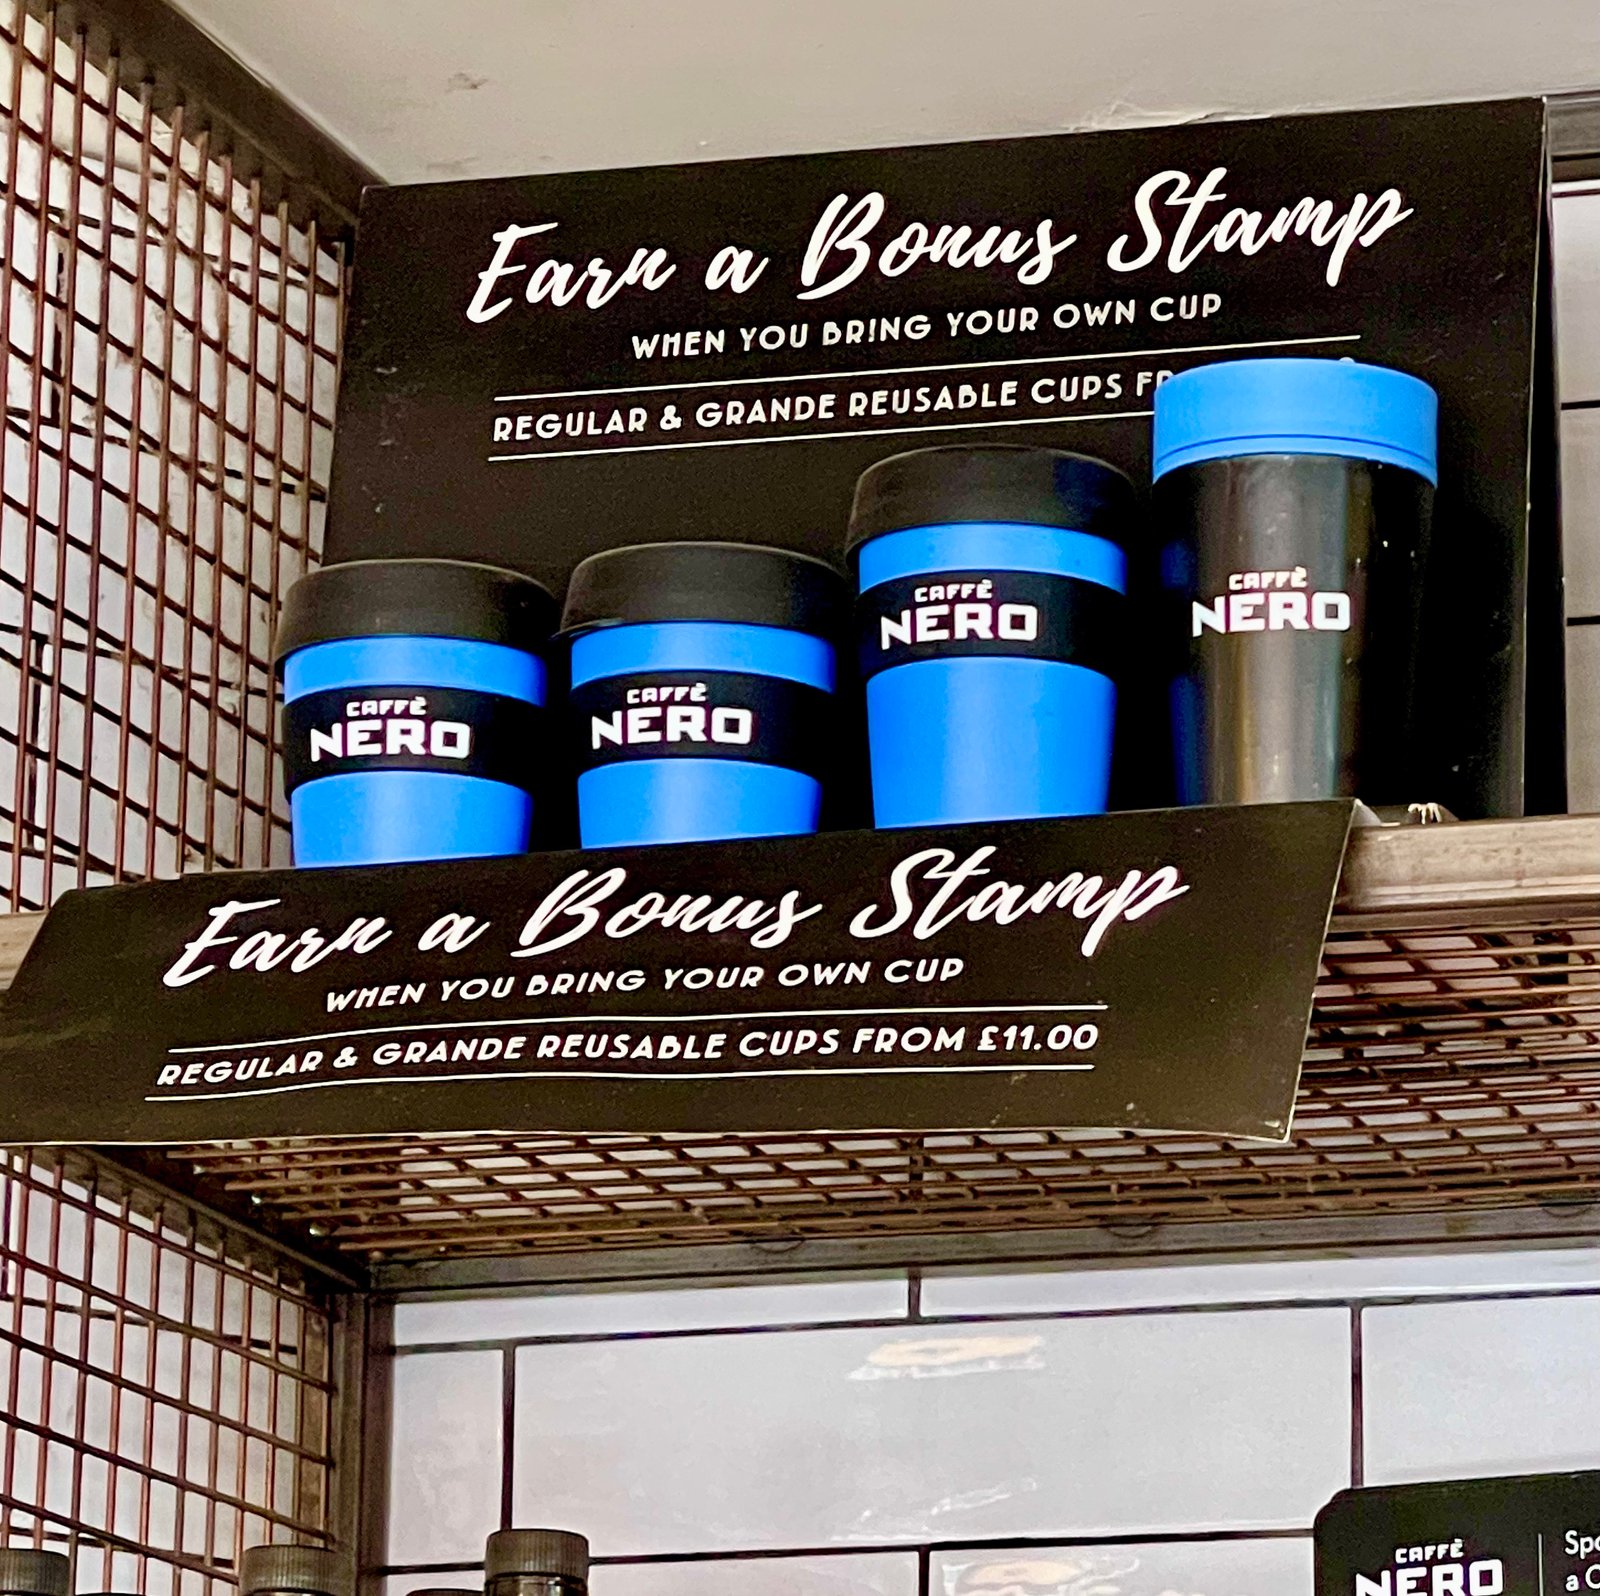 Earn a Bonus stamp from Caffe Nero when you bring your own cup